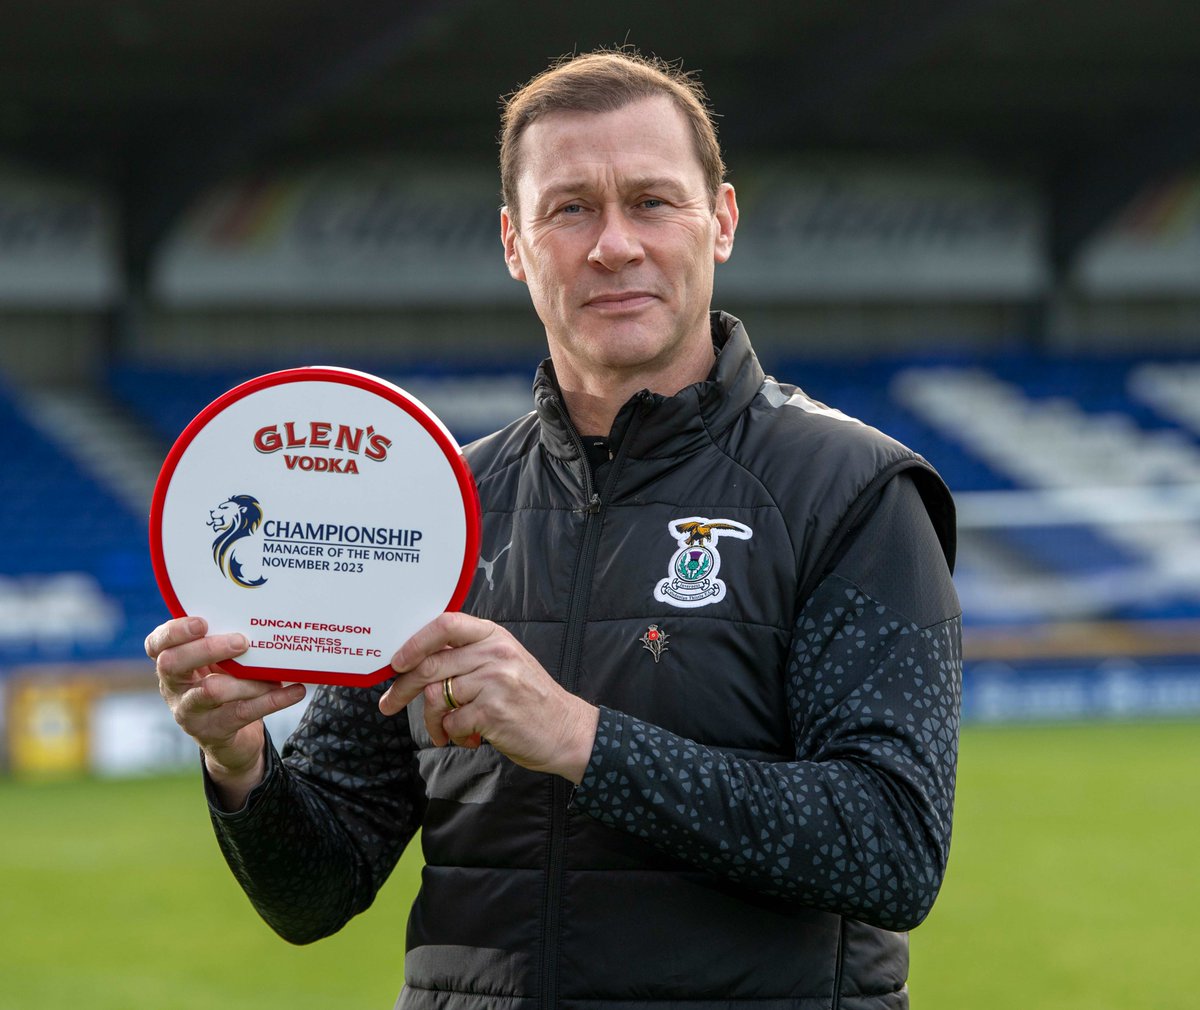 👏🏆 Congratulations to ICTFC Manager Duncan Ferguson, as he has been named the @GlensVodkaLLG @SPFL Scottish Championship Manager of the Month for November 2023. 📷 @TMPfoto 👉 ictfc.com/duncan-ferguso…